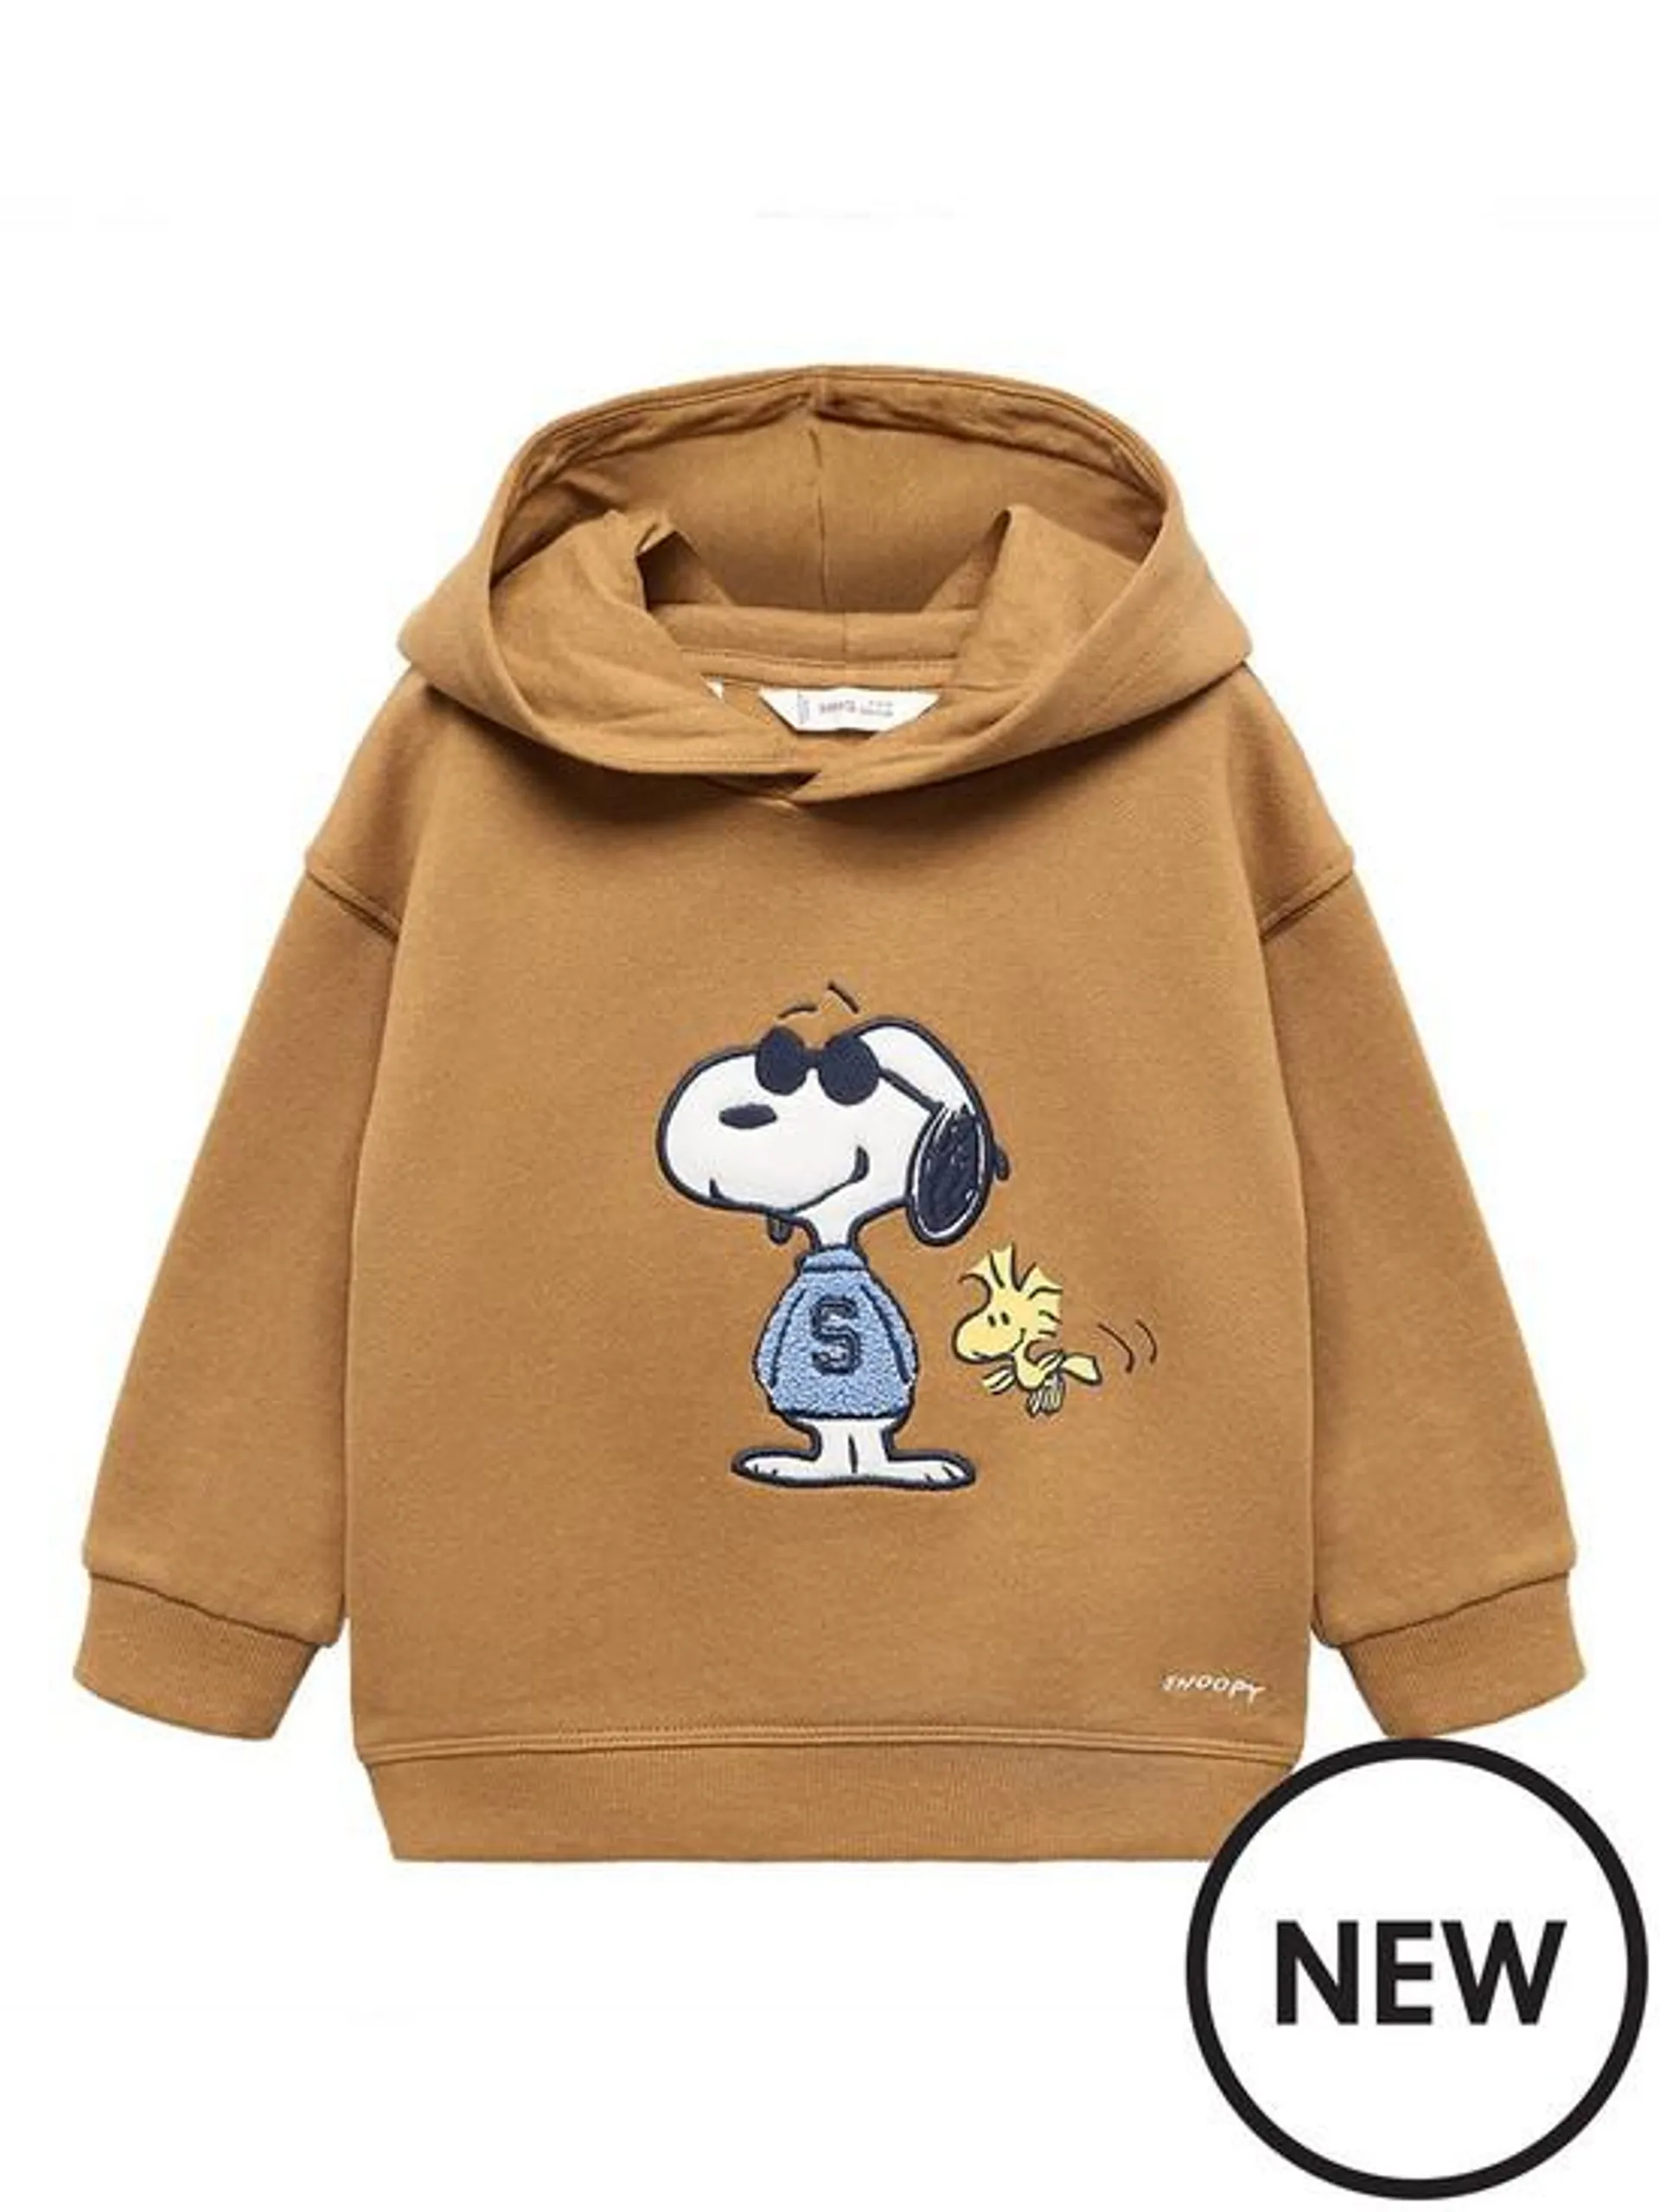 Younger Boys Snoopy Hoodie - Dark Yellow